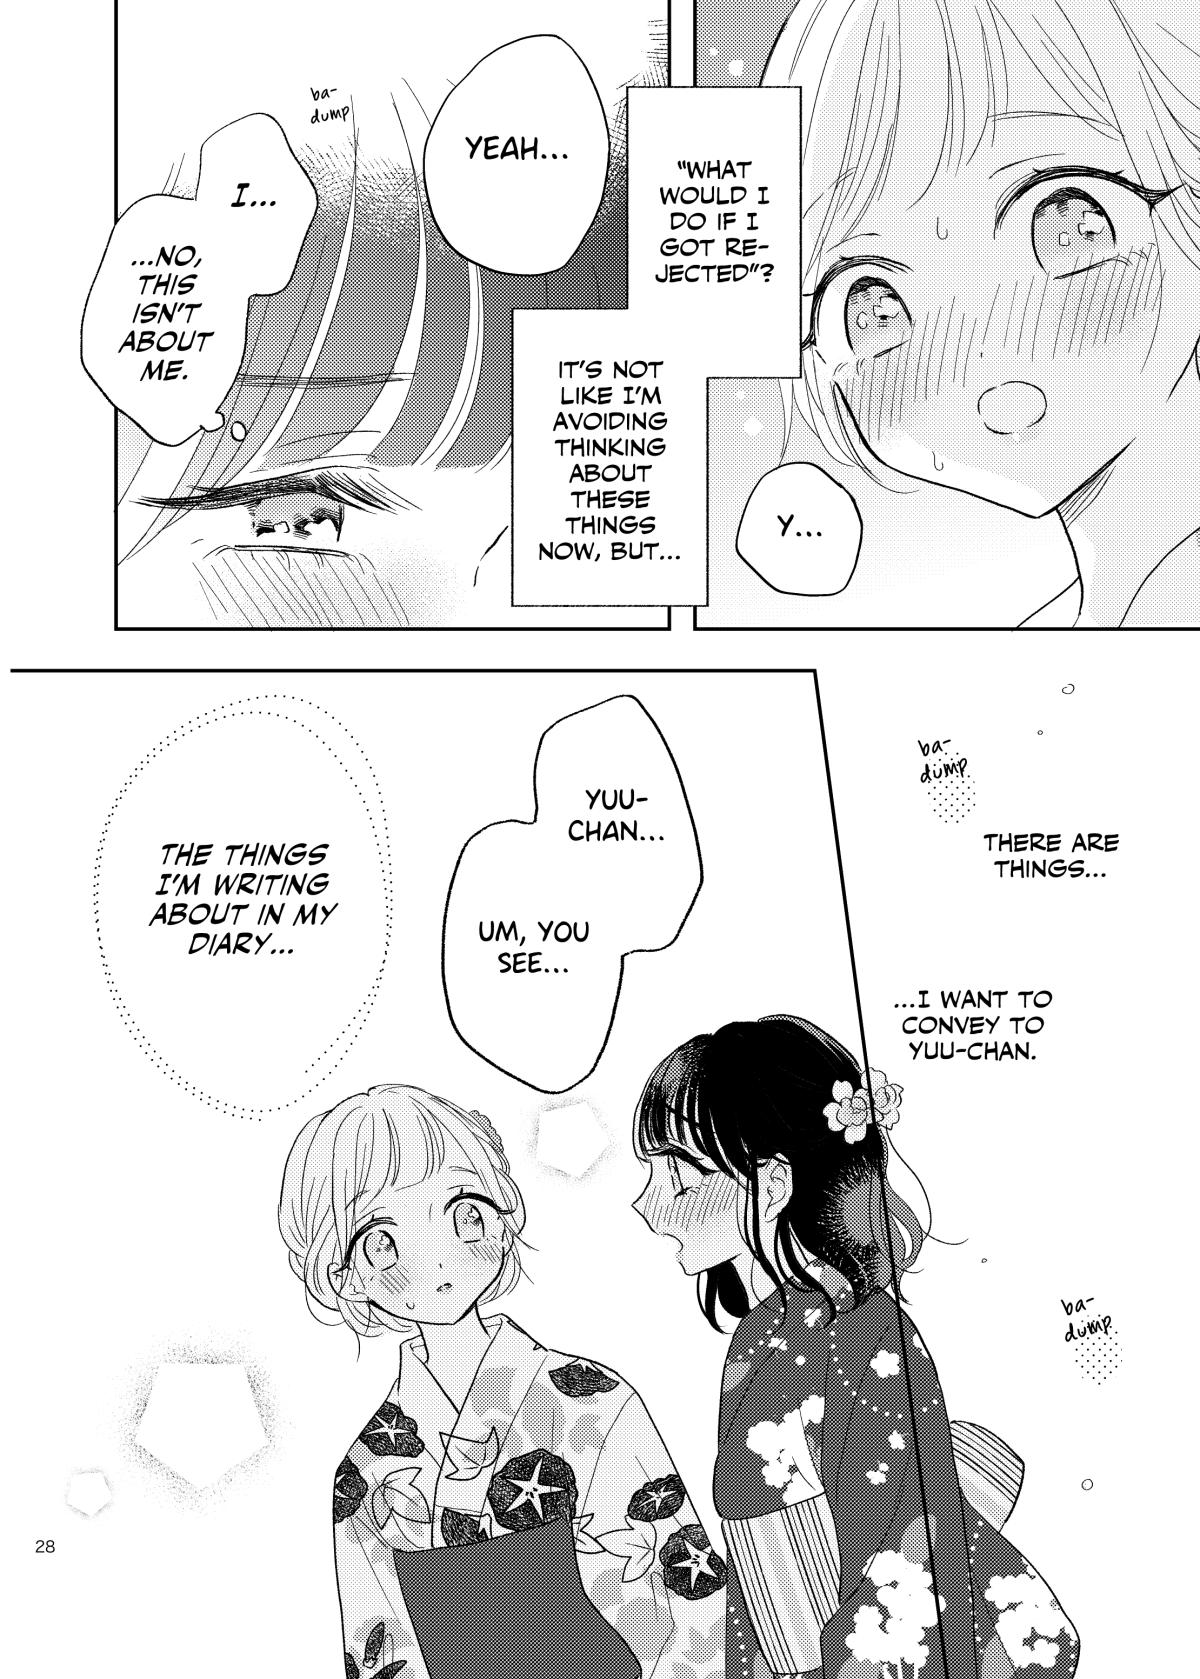 Ami-Chan's Diary - Page 5